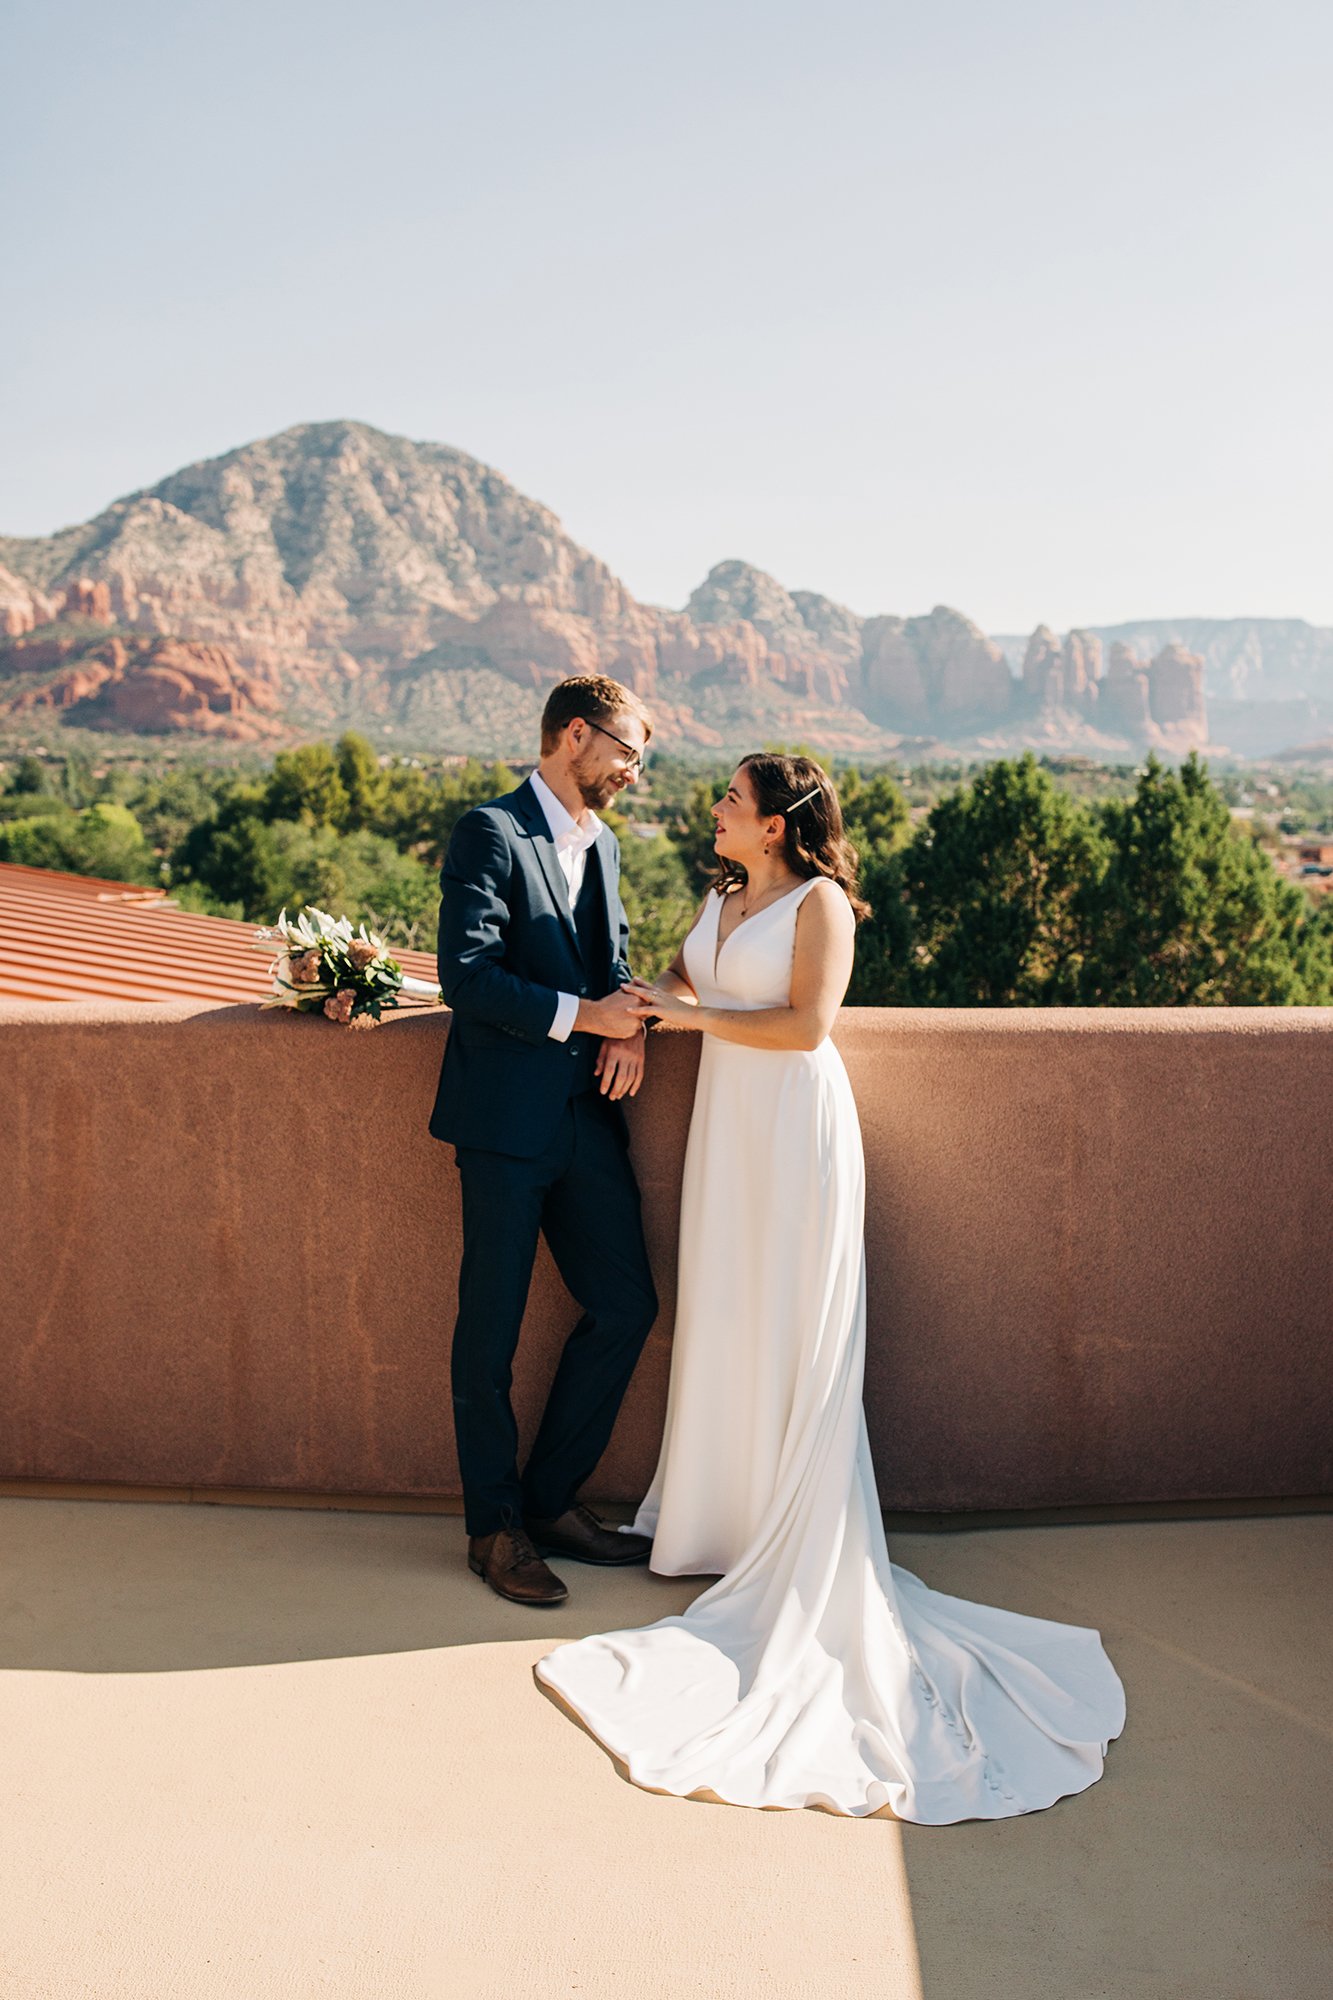 Steph looks into her groom's eye, while Sedona's mountains loom in the background